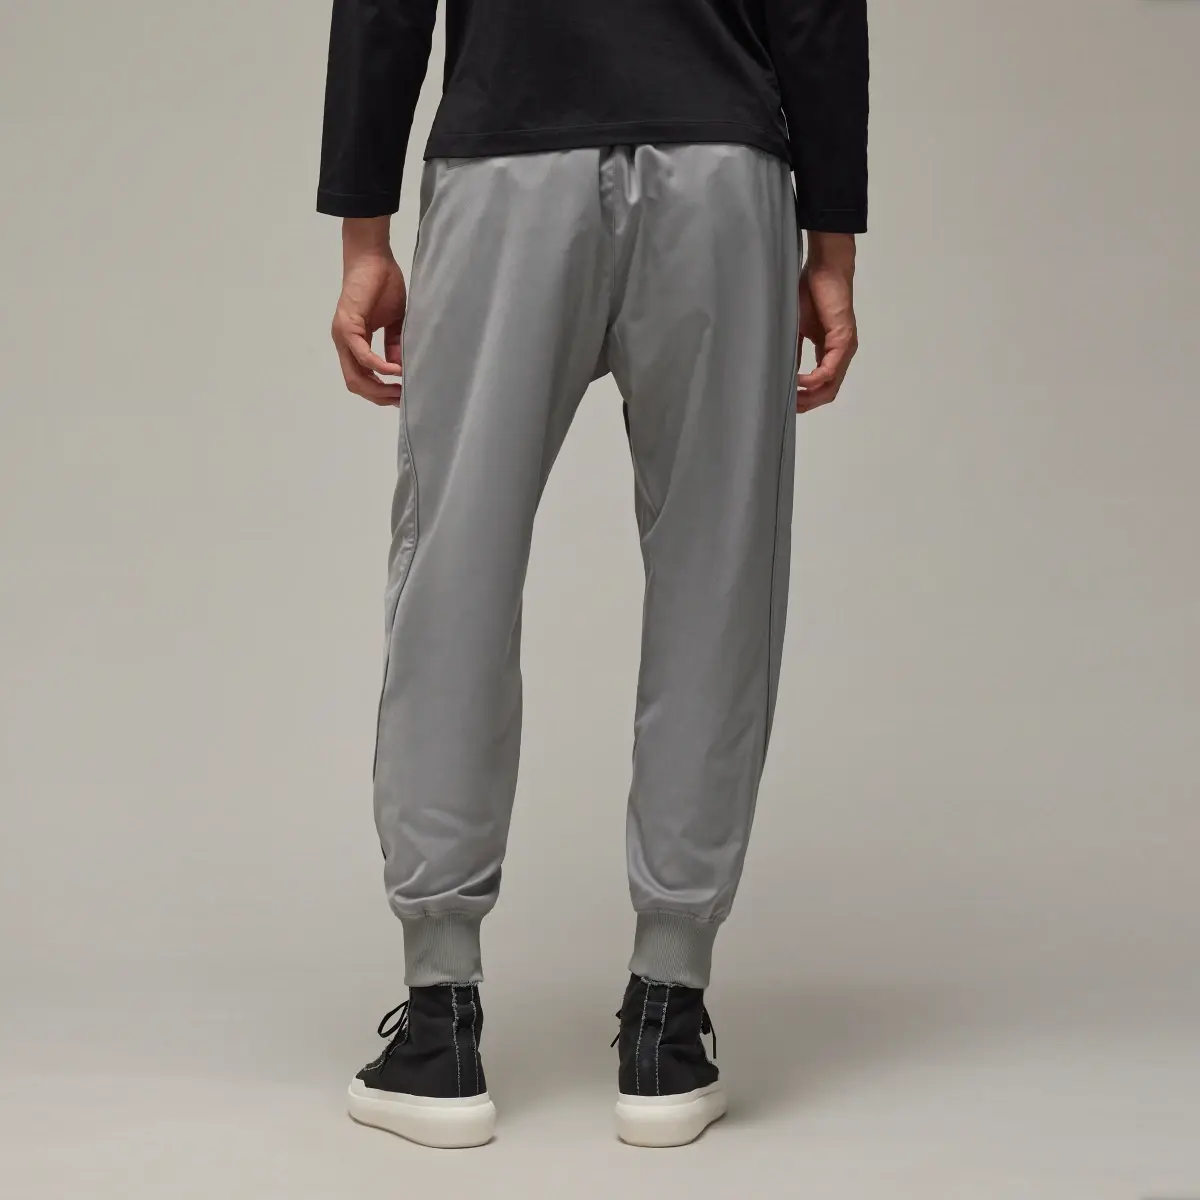 Adidas Y-3 Refined Woven Cuffed Tracksuit Bottoms. 3